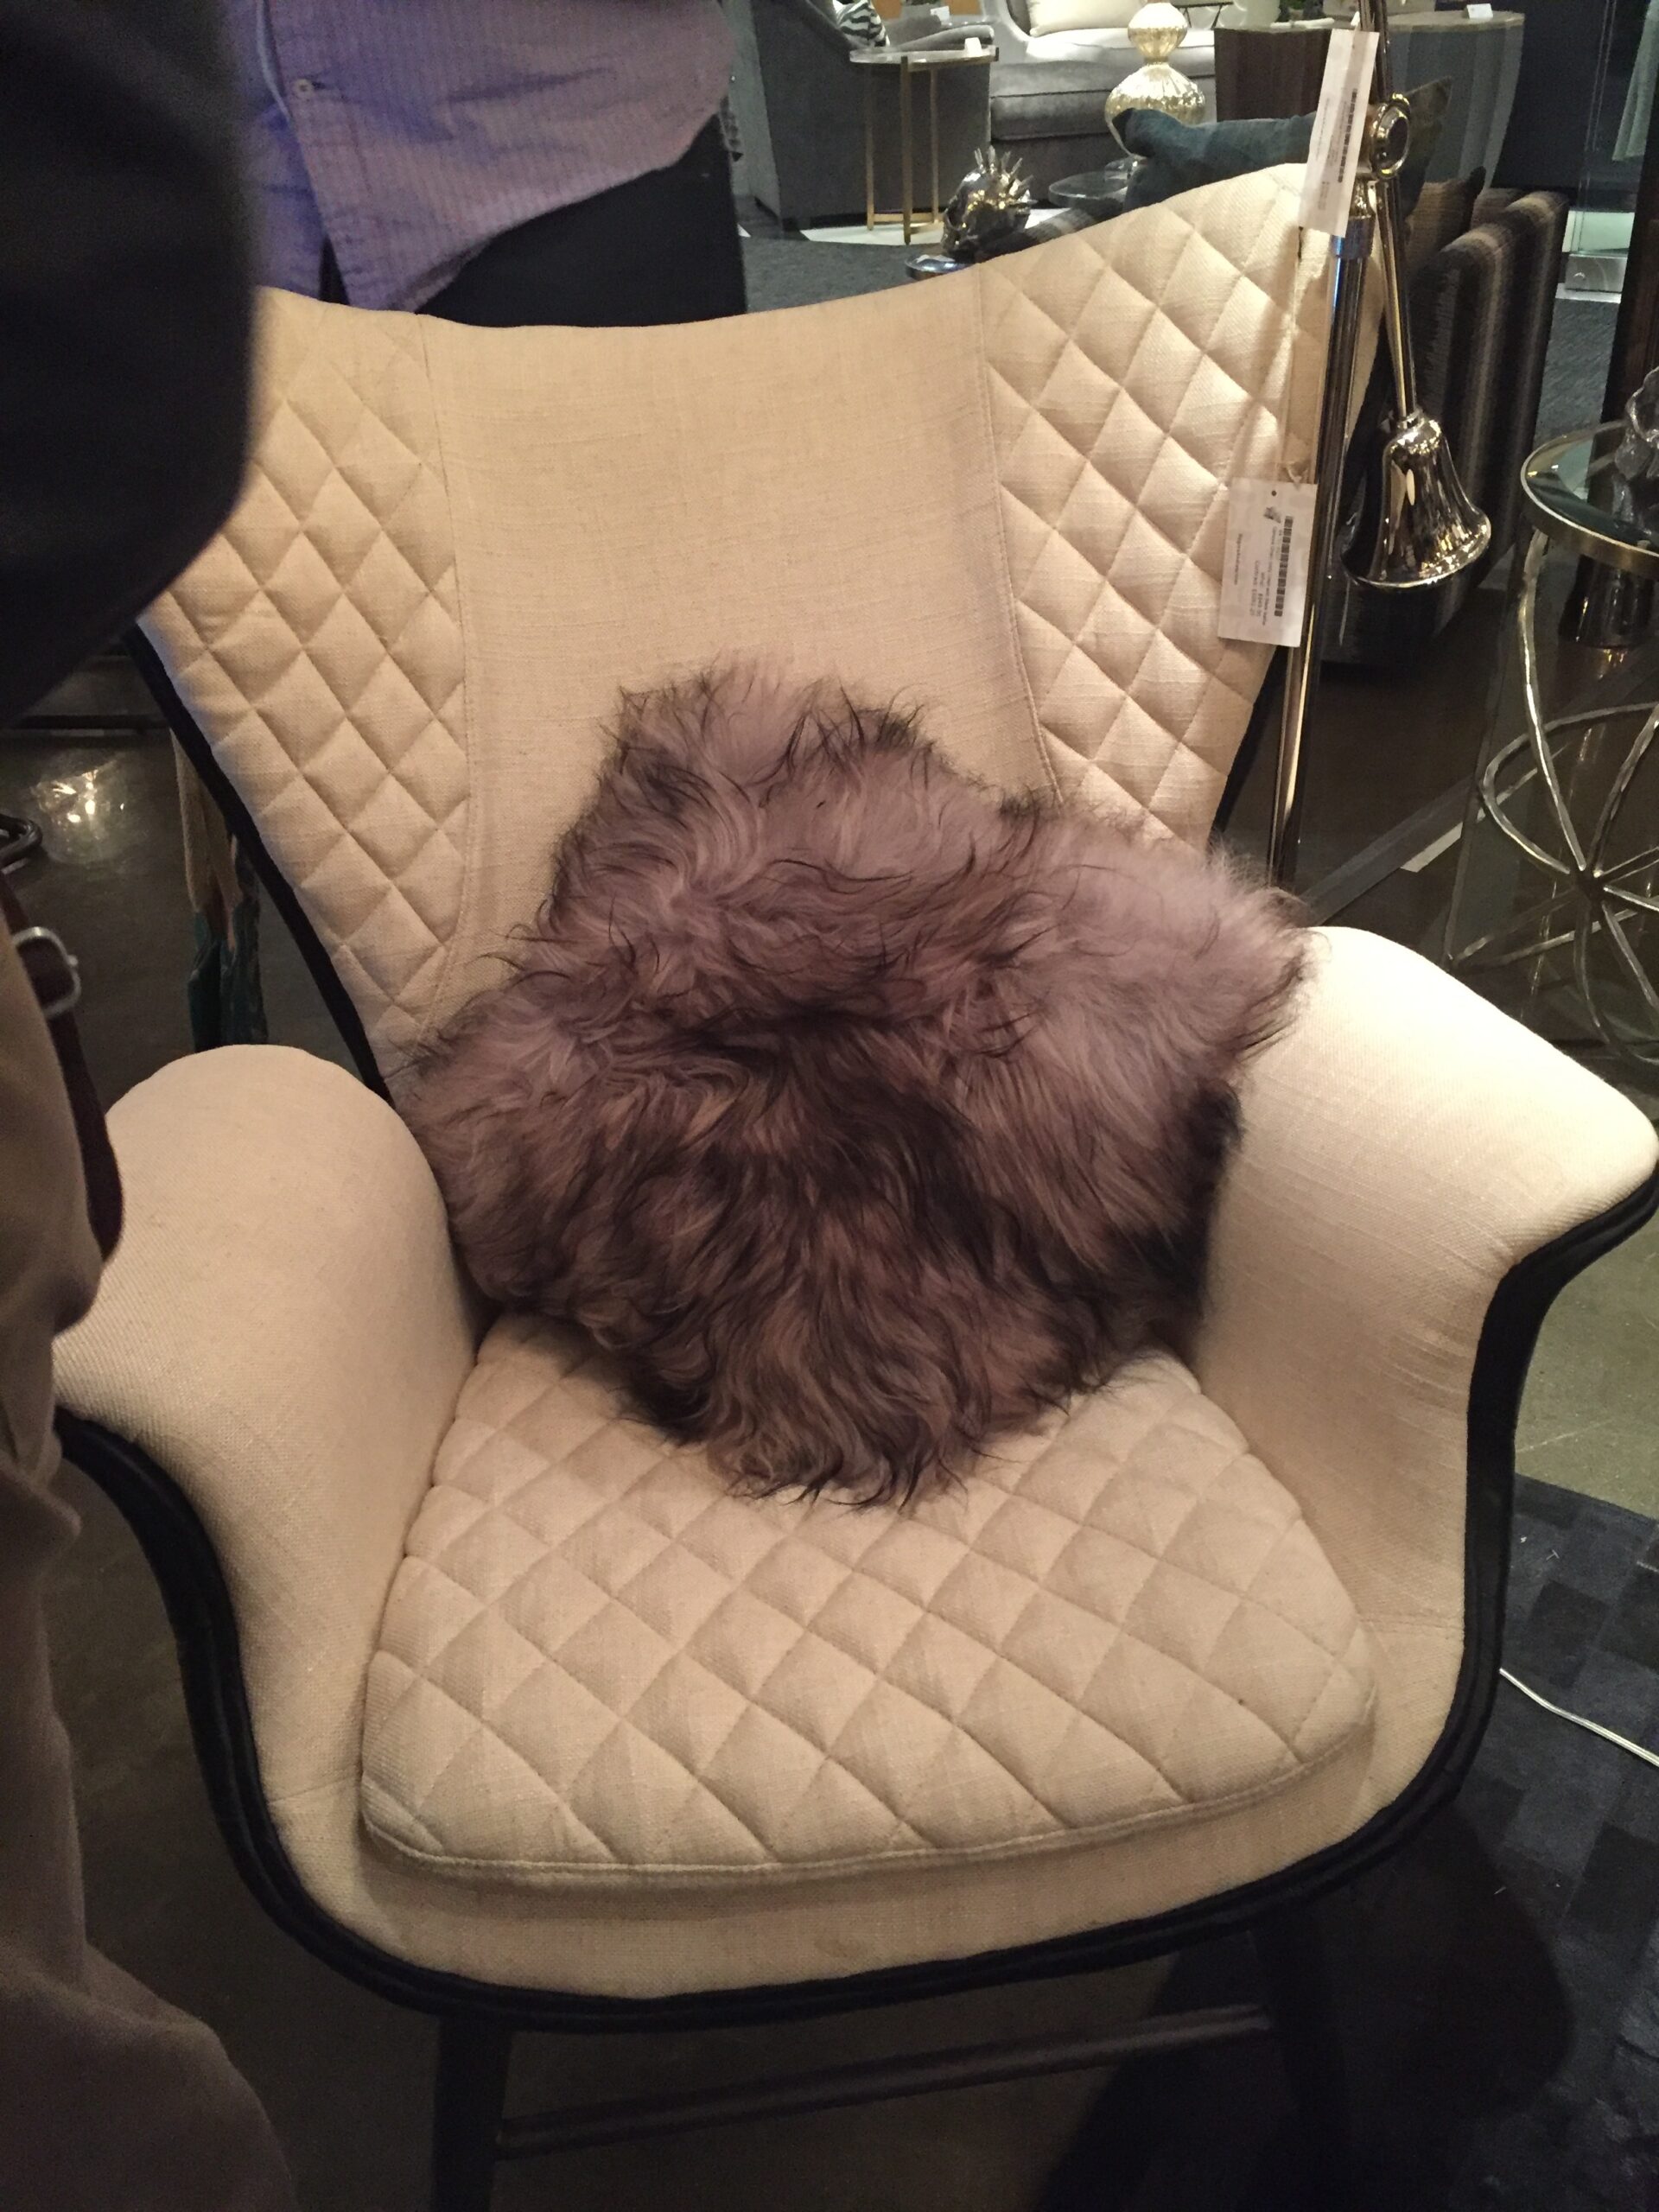 Not your typical tufting, but boy does it make a statement! Love the elements of this chair and fur pillow from Regina Andrew to add the drama necessary for the season.